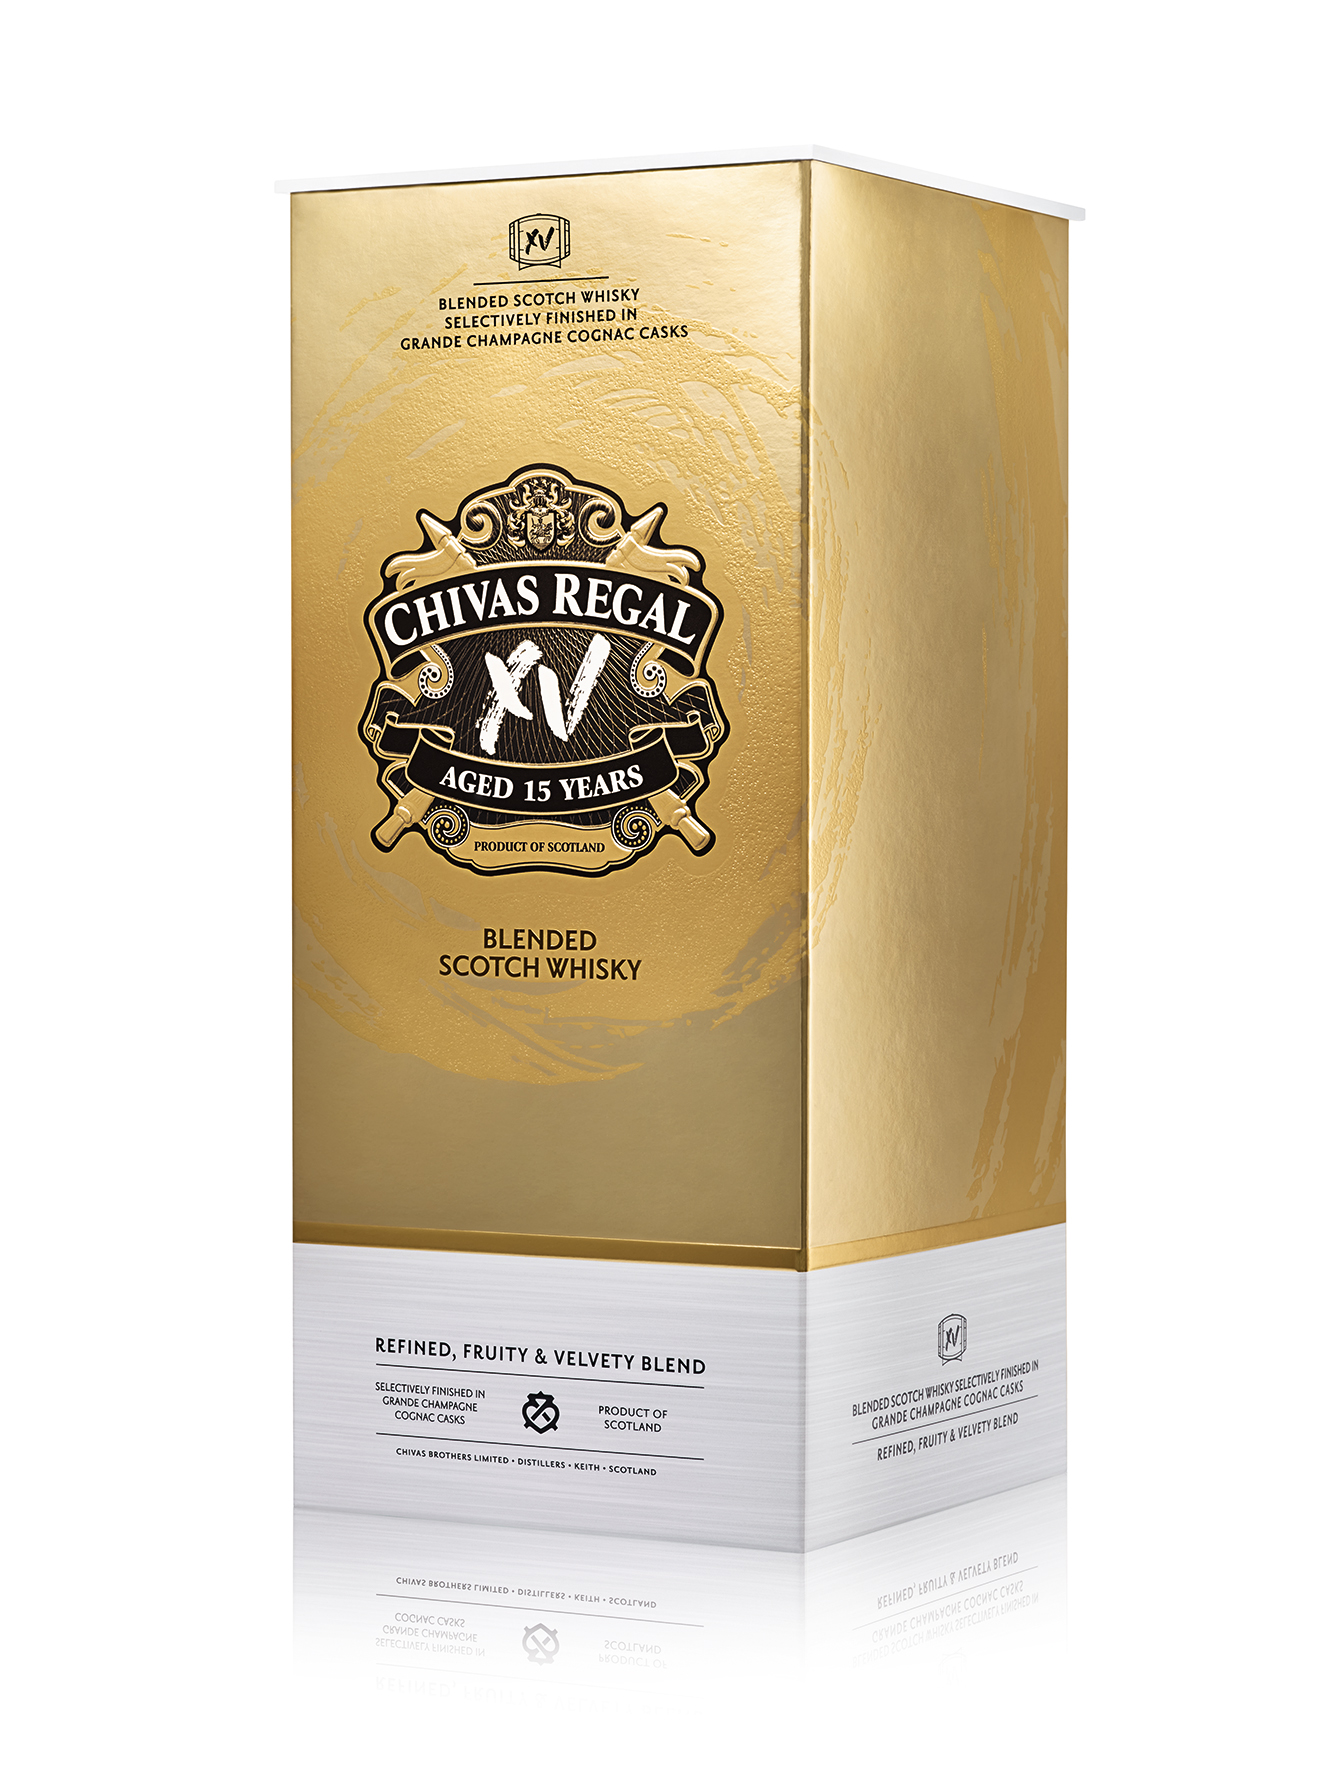 Chivas releases XV 15 year old finished in Grande